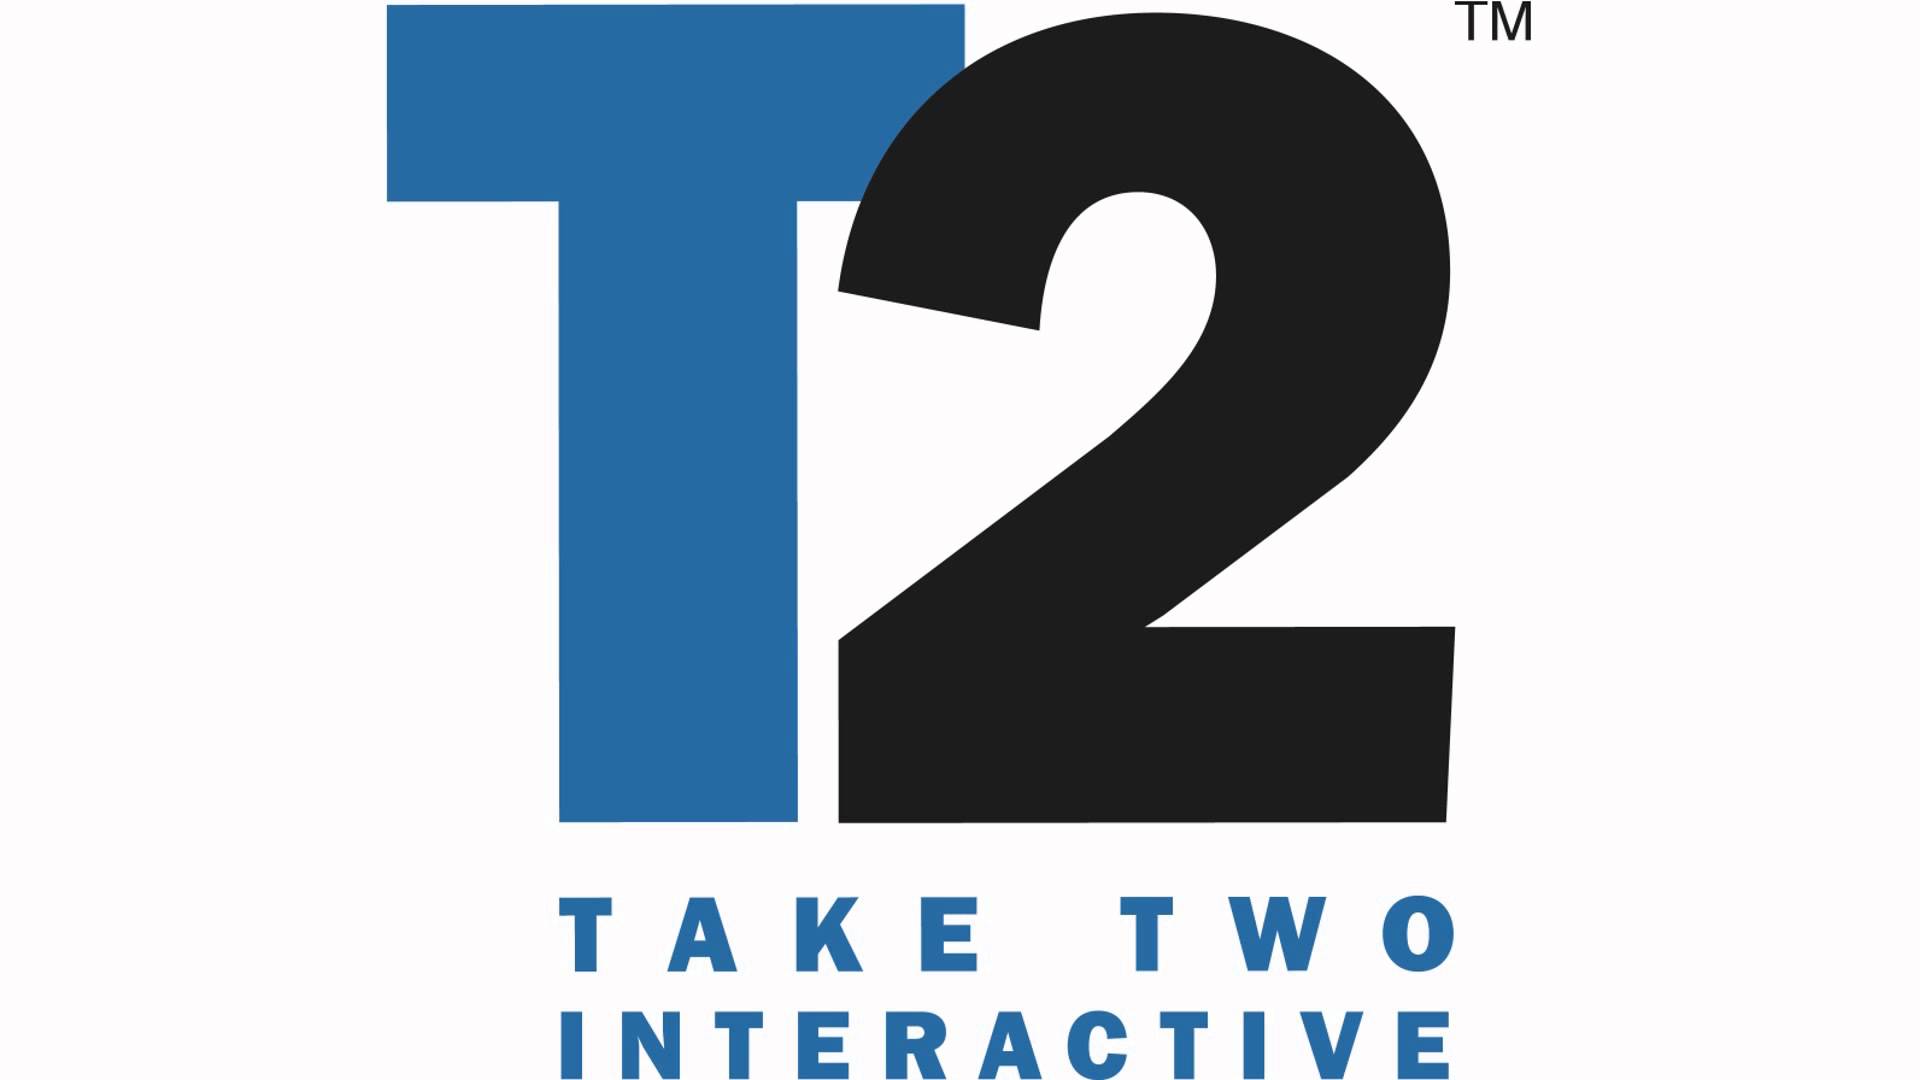 Take-Two Interactive CEO Says There are “No Current Plans for Layoffs”